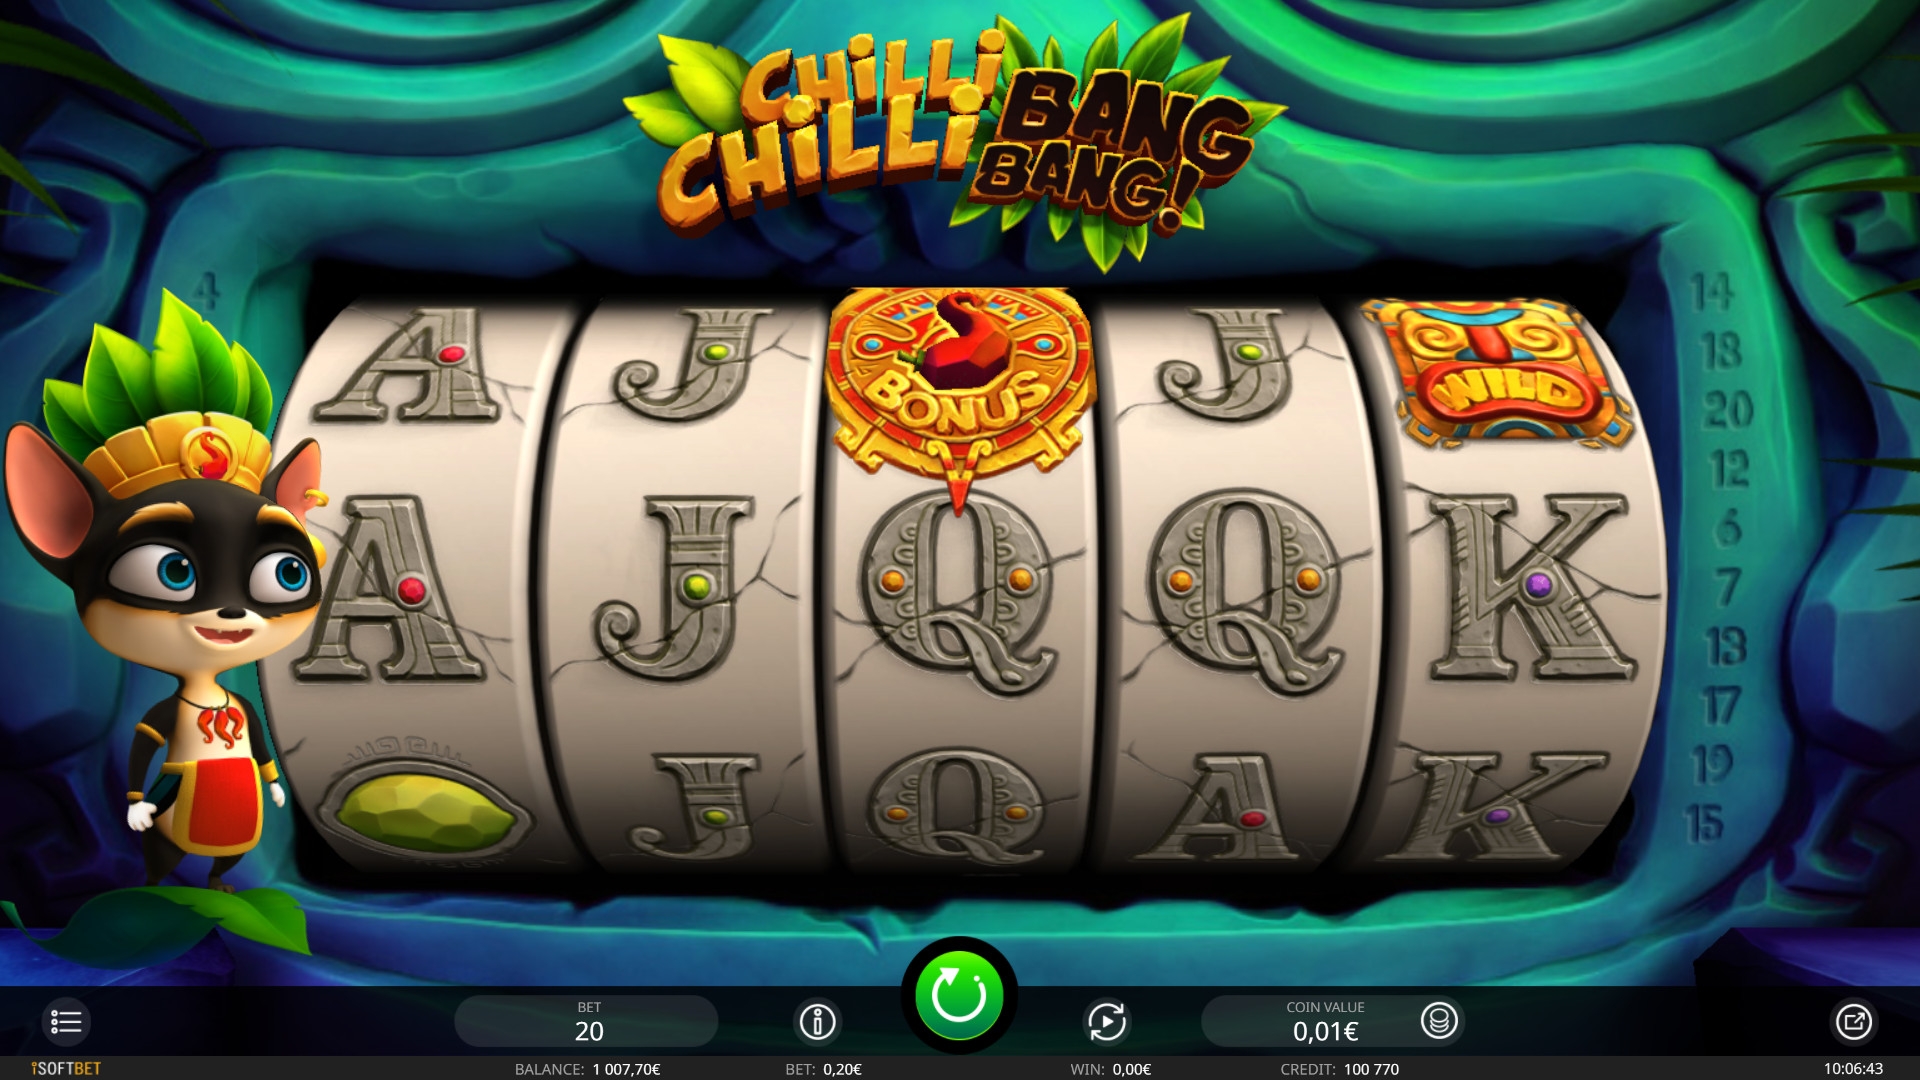 Chilli Chilli Bang Bang (Chilli Chilli Bang Bang) from category Slots